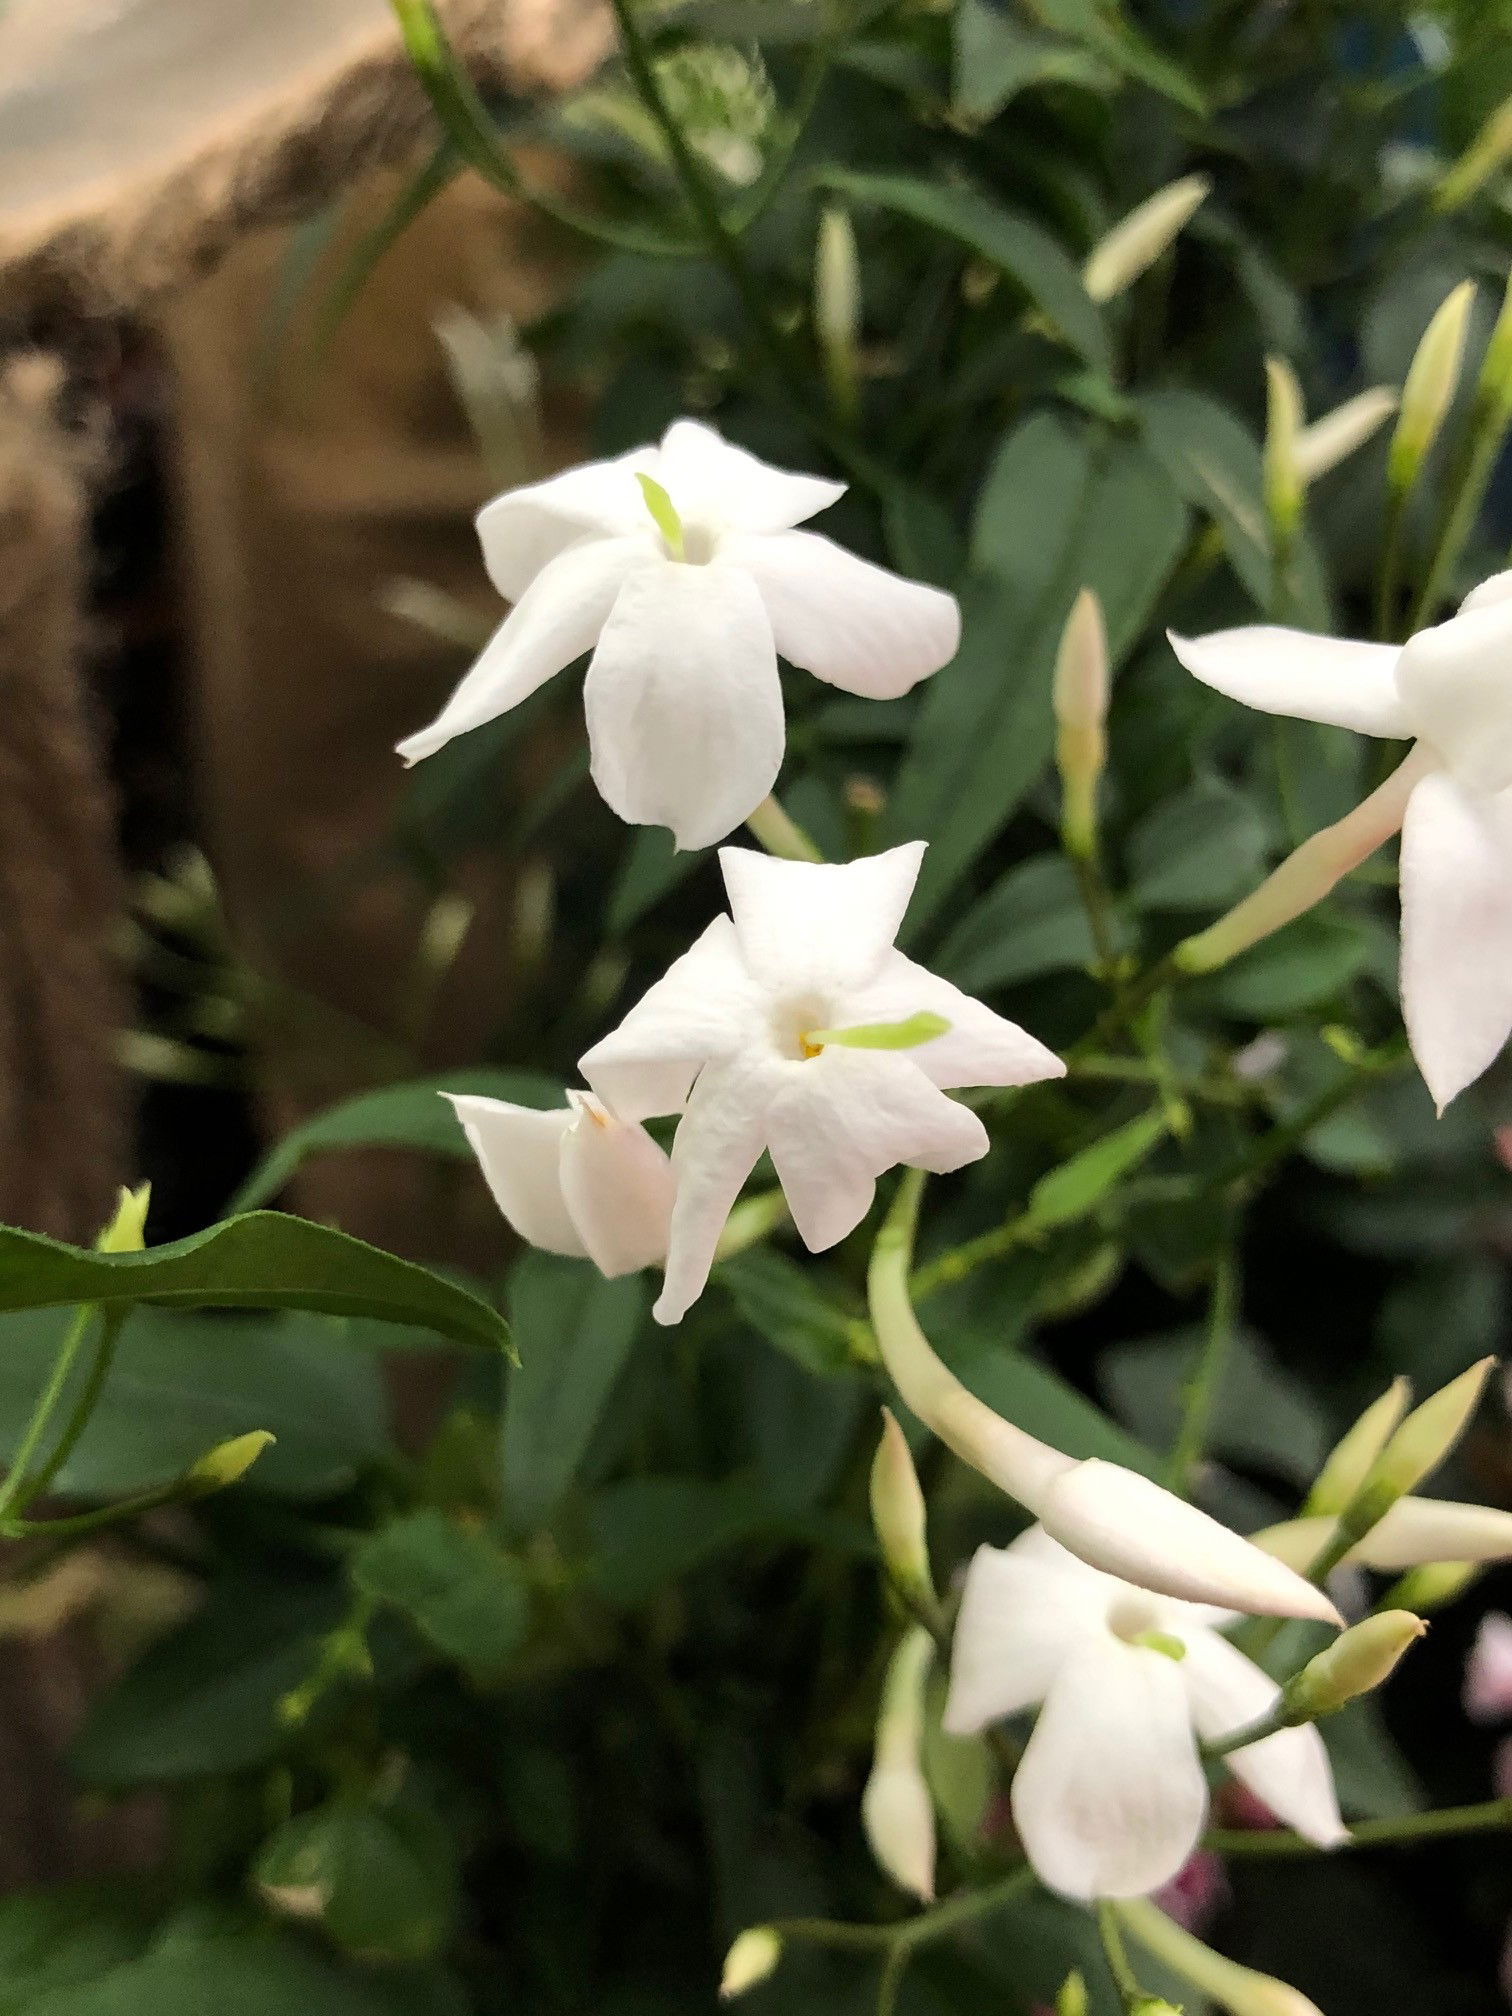 How to Grow and Care for Indoor Jasmine Plants